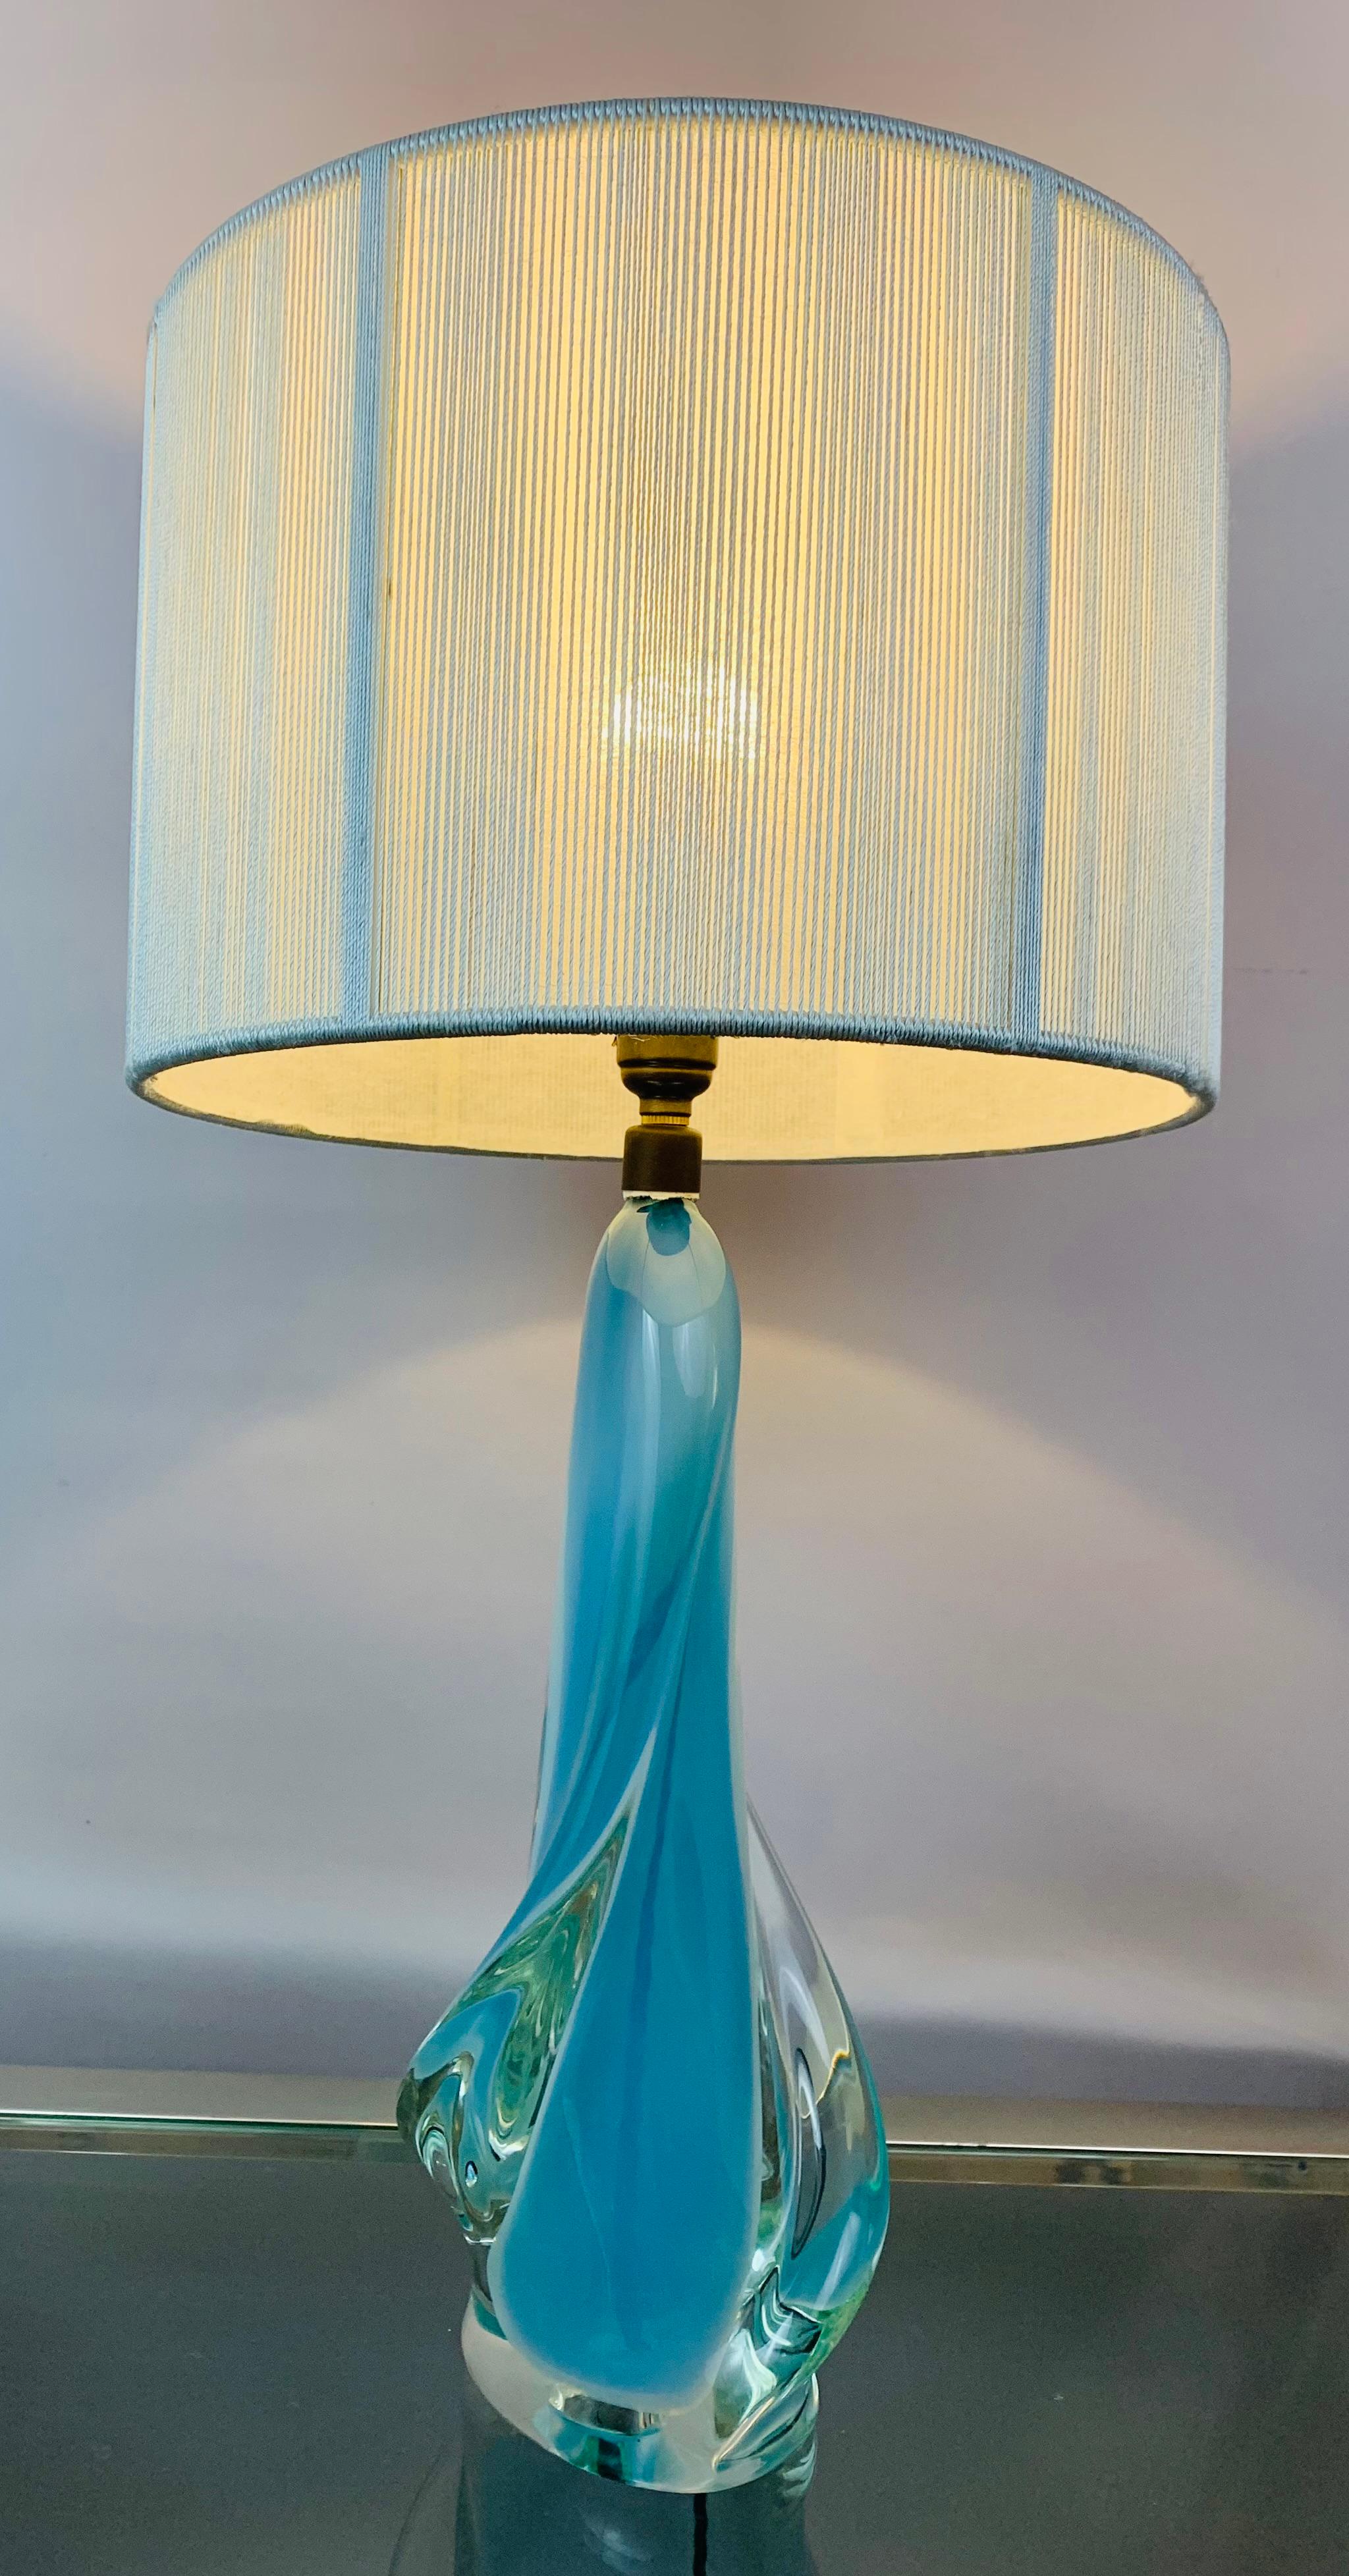 Val Saint Lambert, opalescent turquoise and clear crystal glass, lamp base. The lamp was made in the 1950s in Belgium. I have never come across this design before which is beautifully made with heavy crystal glass in a very elegant twsited, swirled